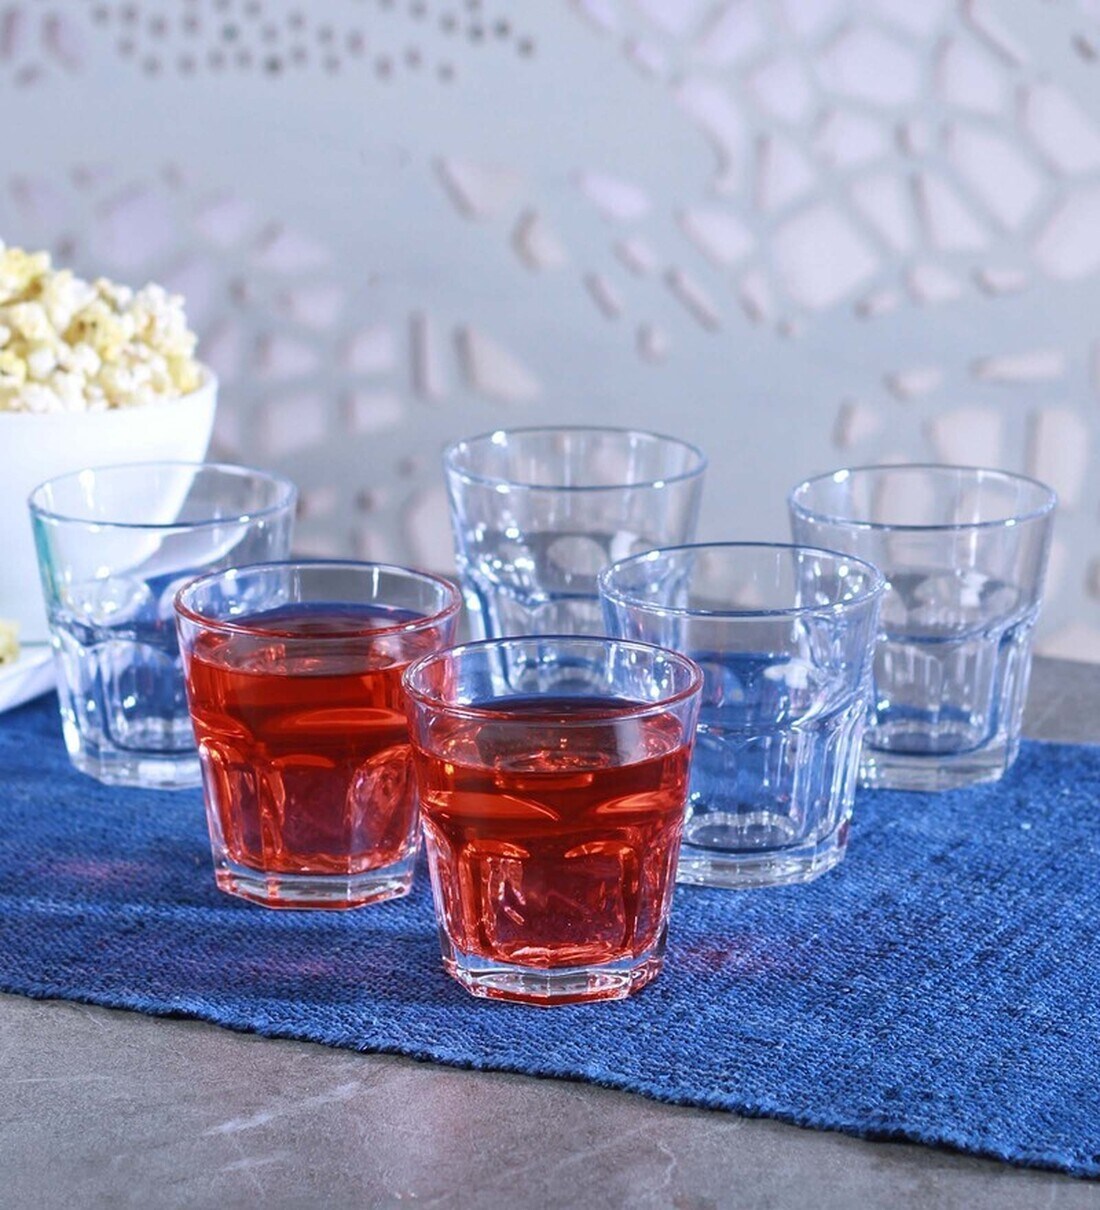 Buy Pasabahce Casablanca 200ml Set Of 12 Whiskey Glass At 25 Off By Pasabahce Pepperfry 7711